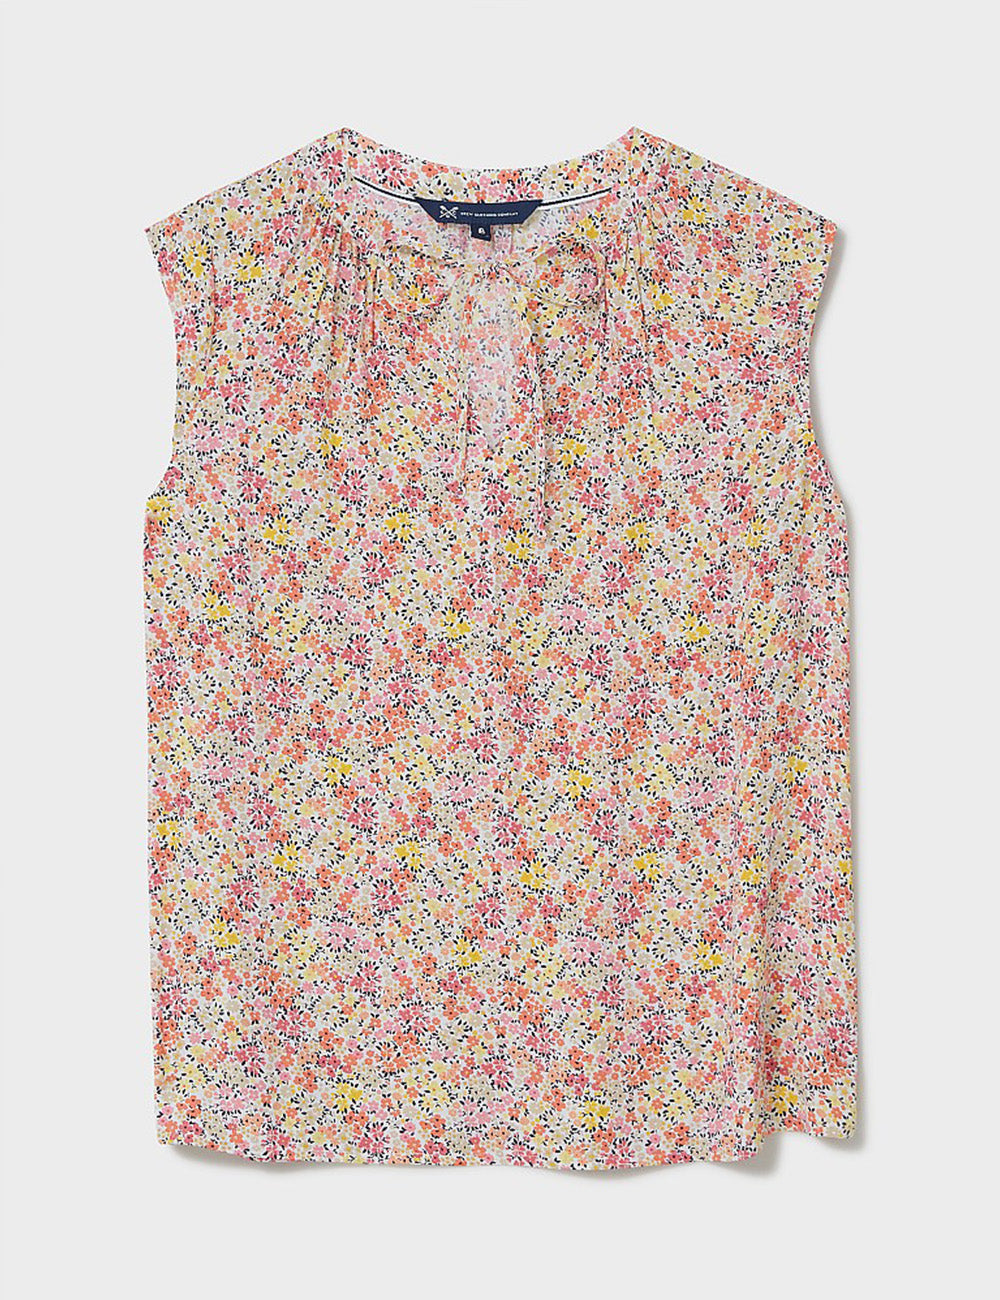 Crew Clothing Olivia Top - Pink Floral